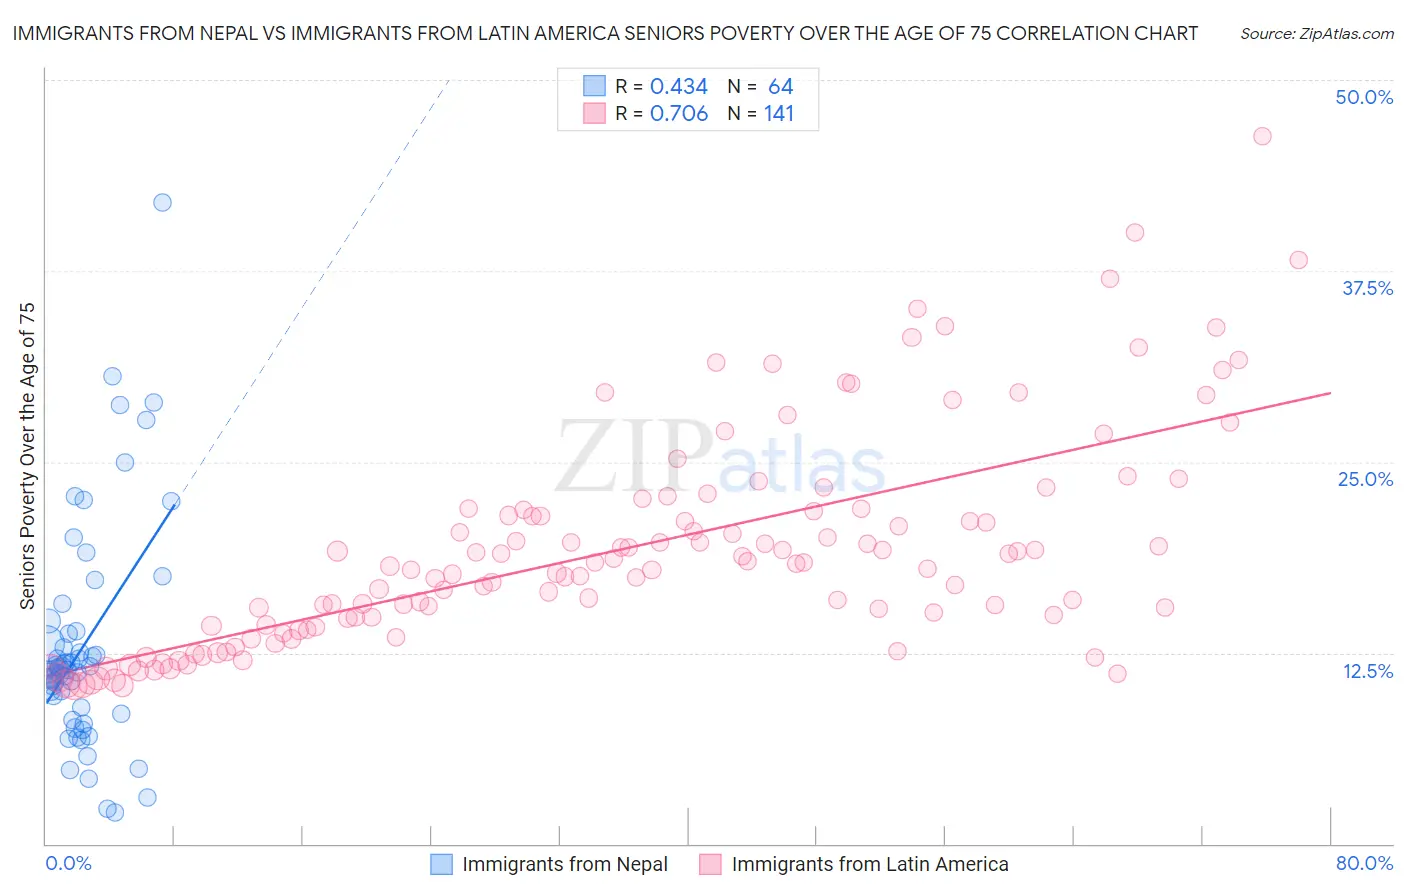 Immigrants from Nepal vs Immigrants from Latin America Seniors Poverty Over the Age of 75